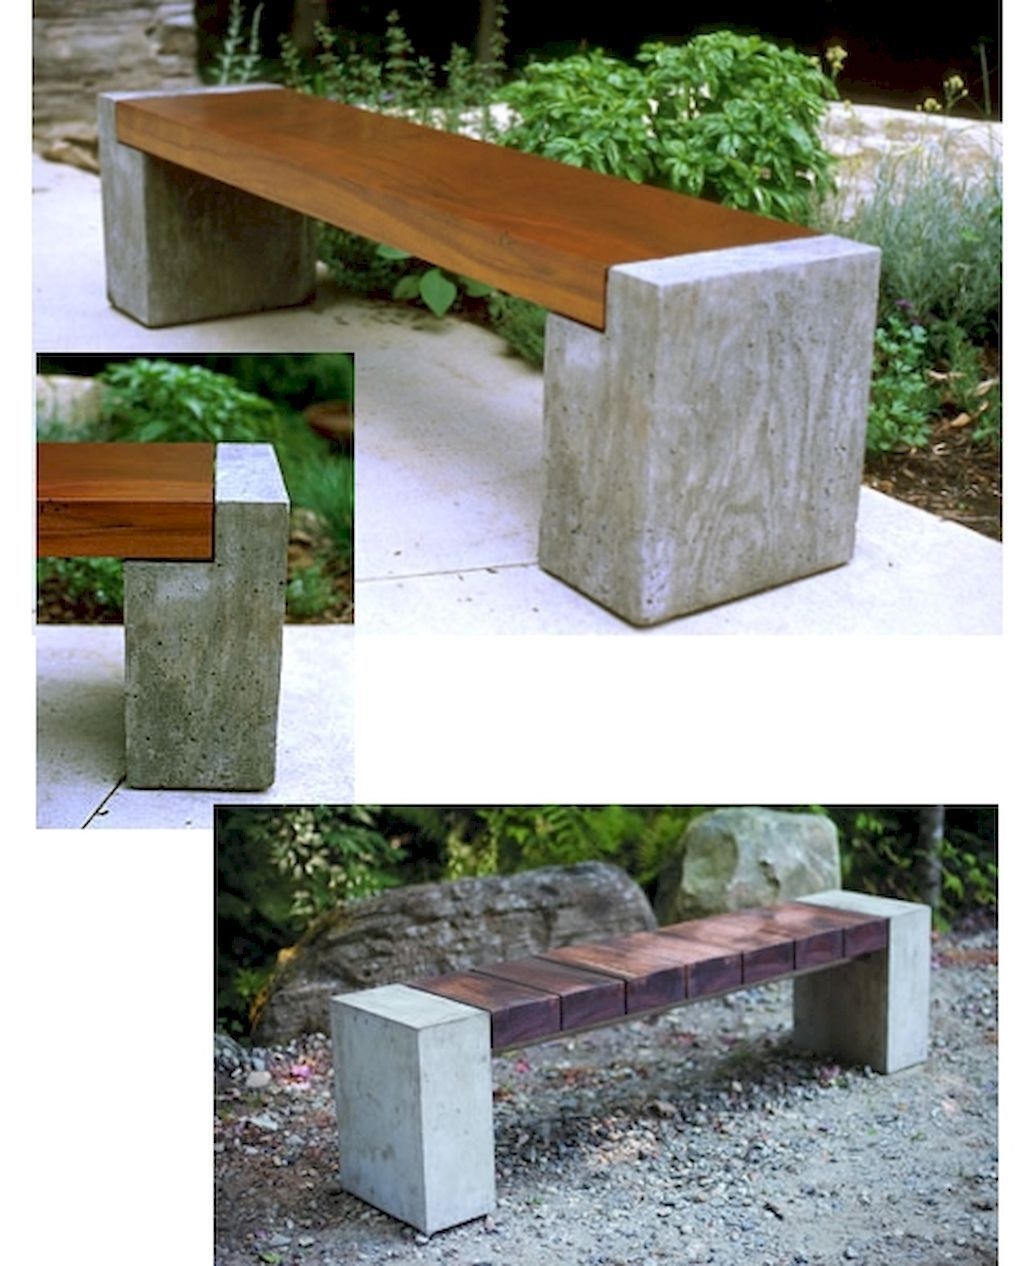 Wood and concrete bench